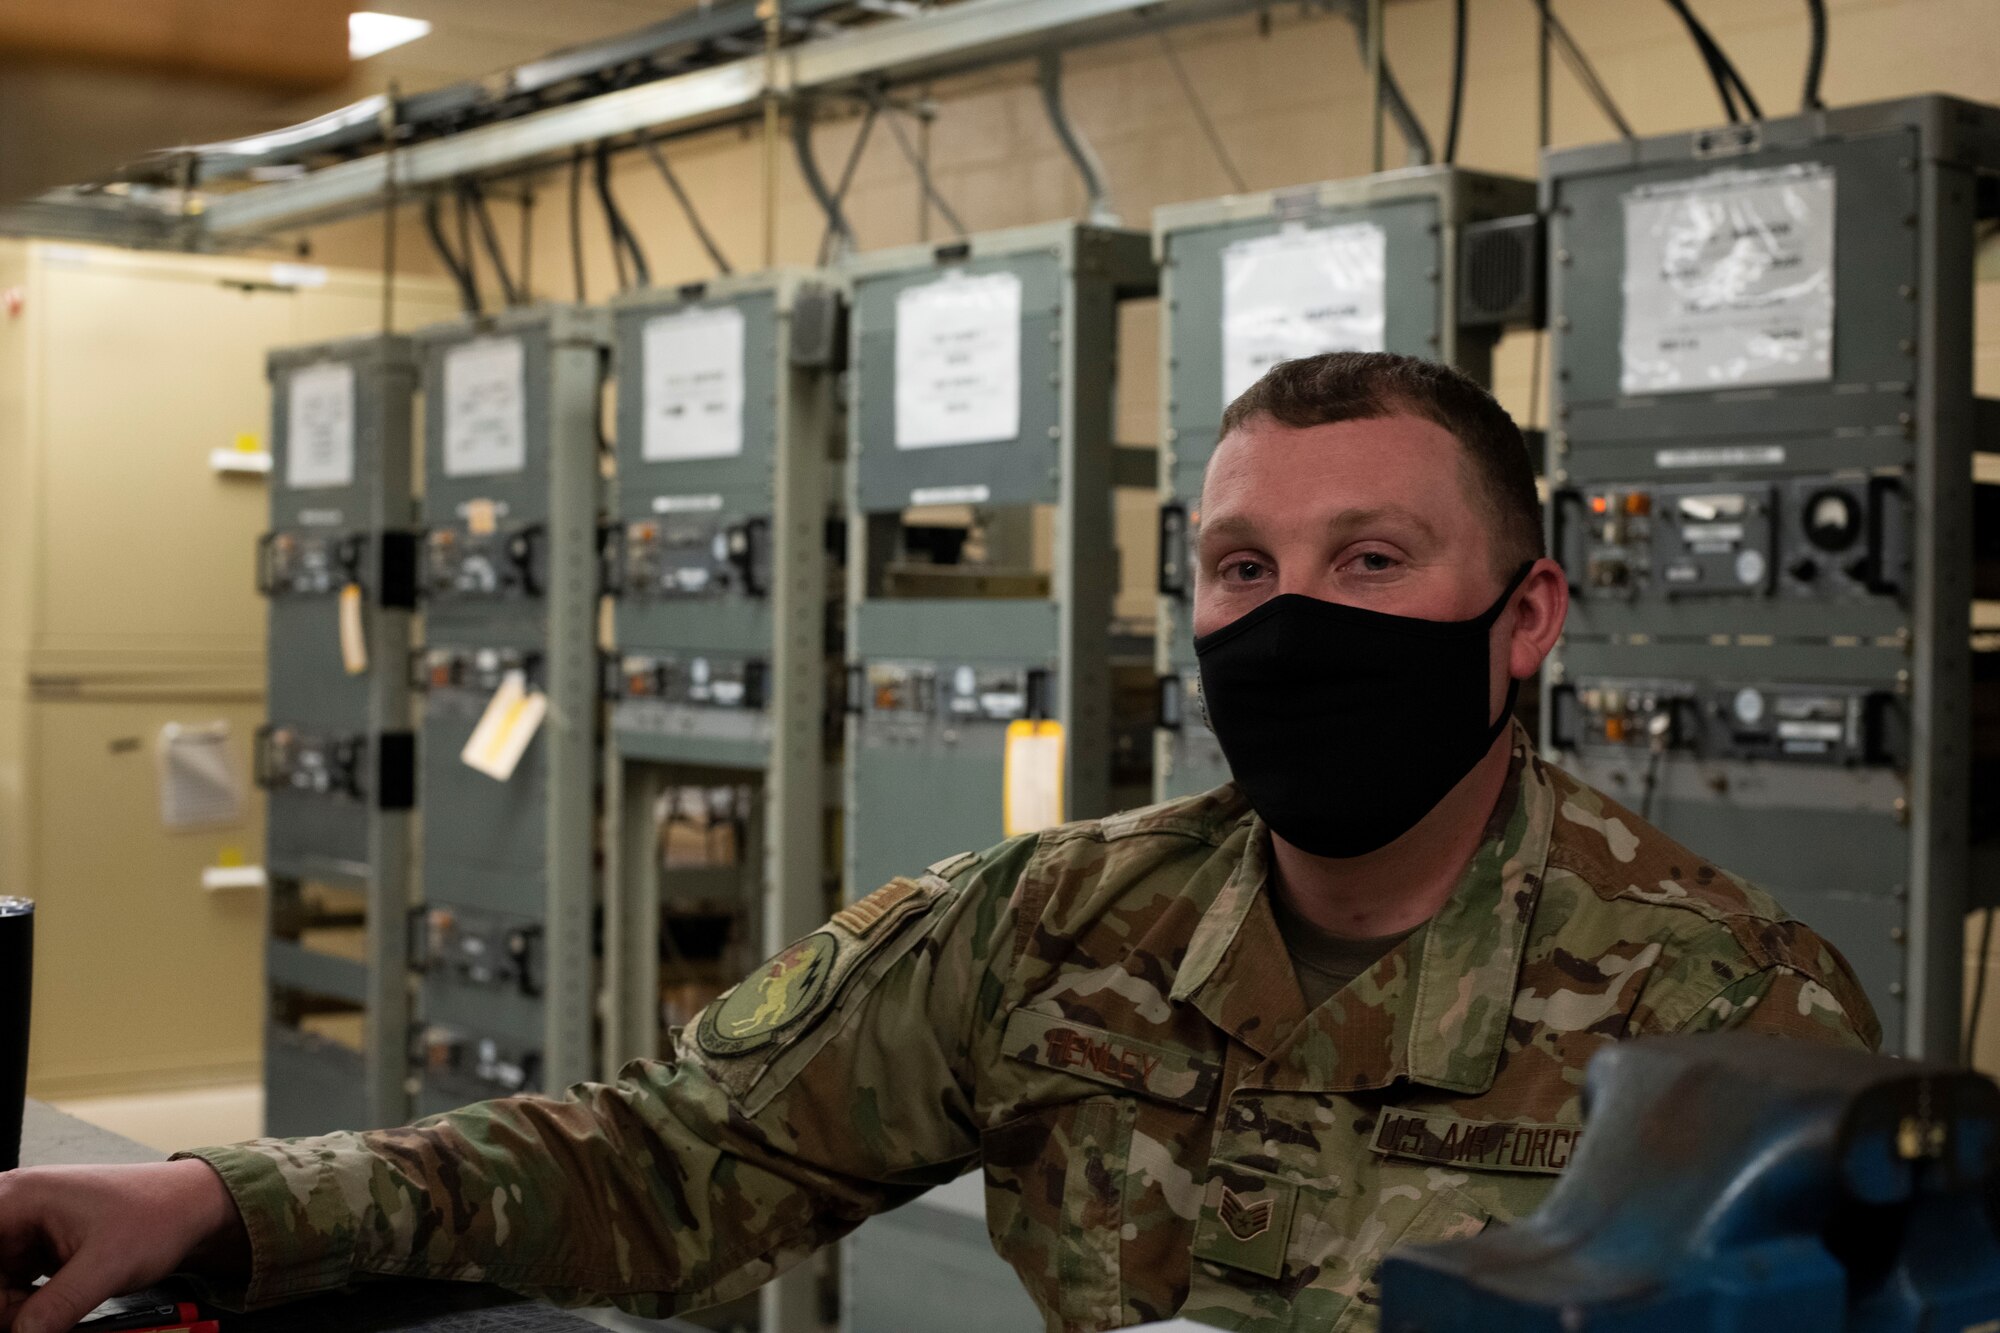 SSgt Richard Henley sits in front of radio equipment.